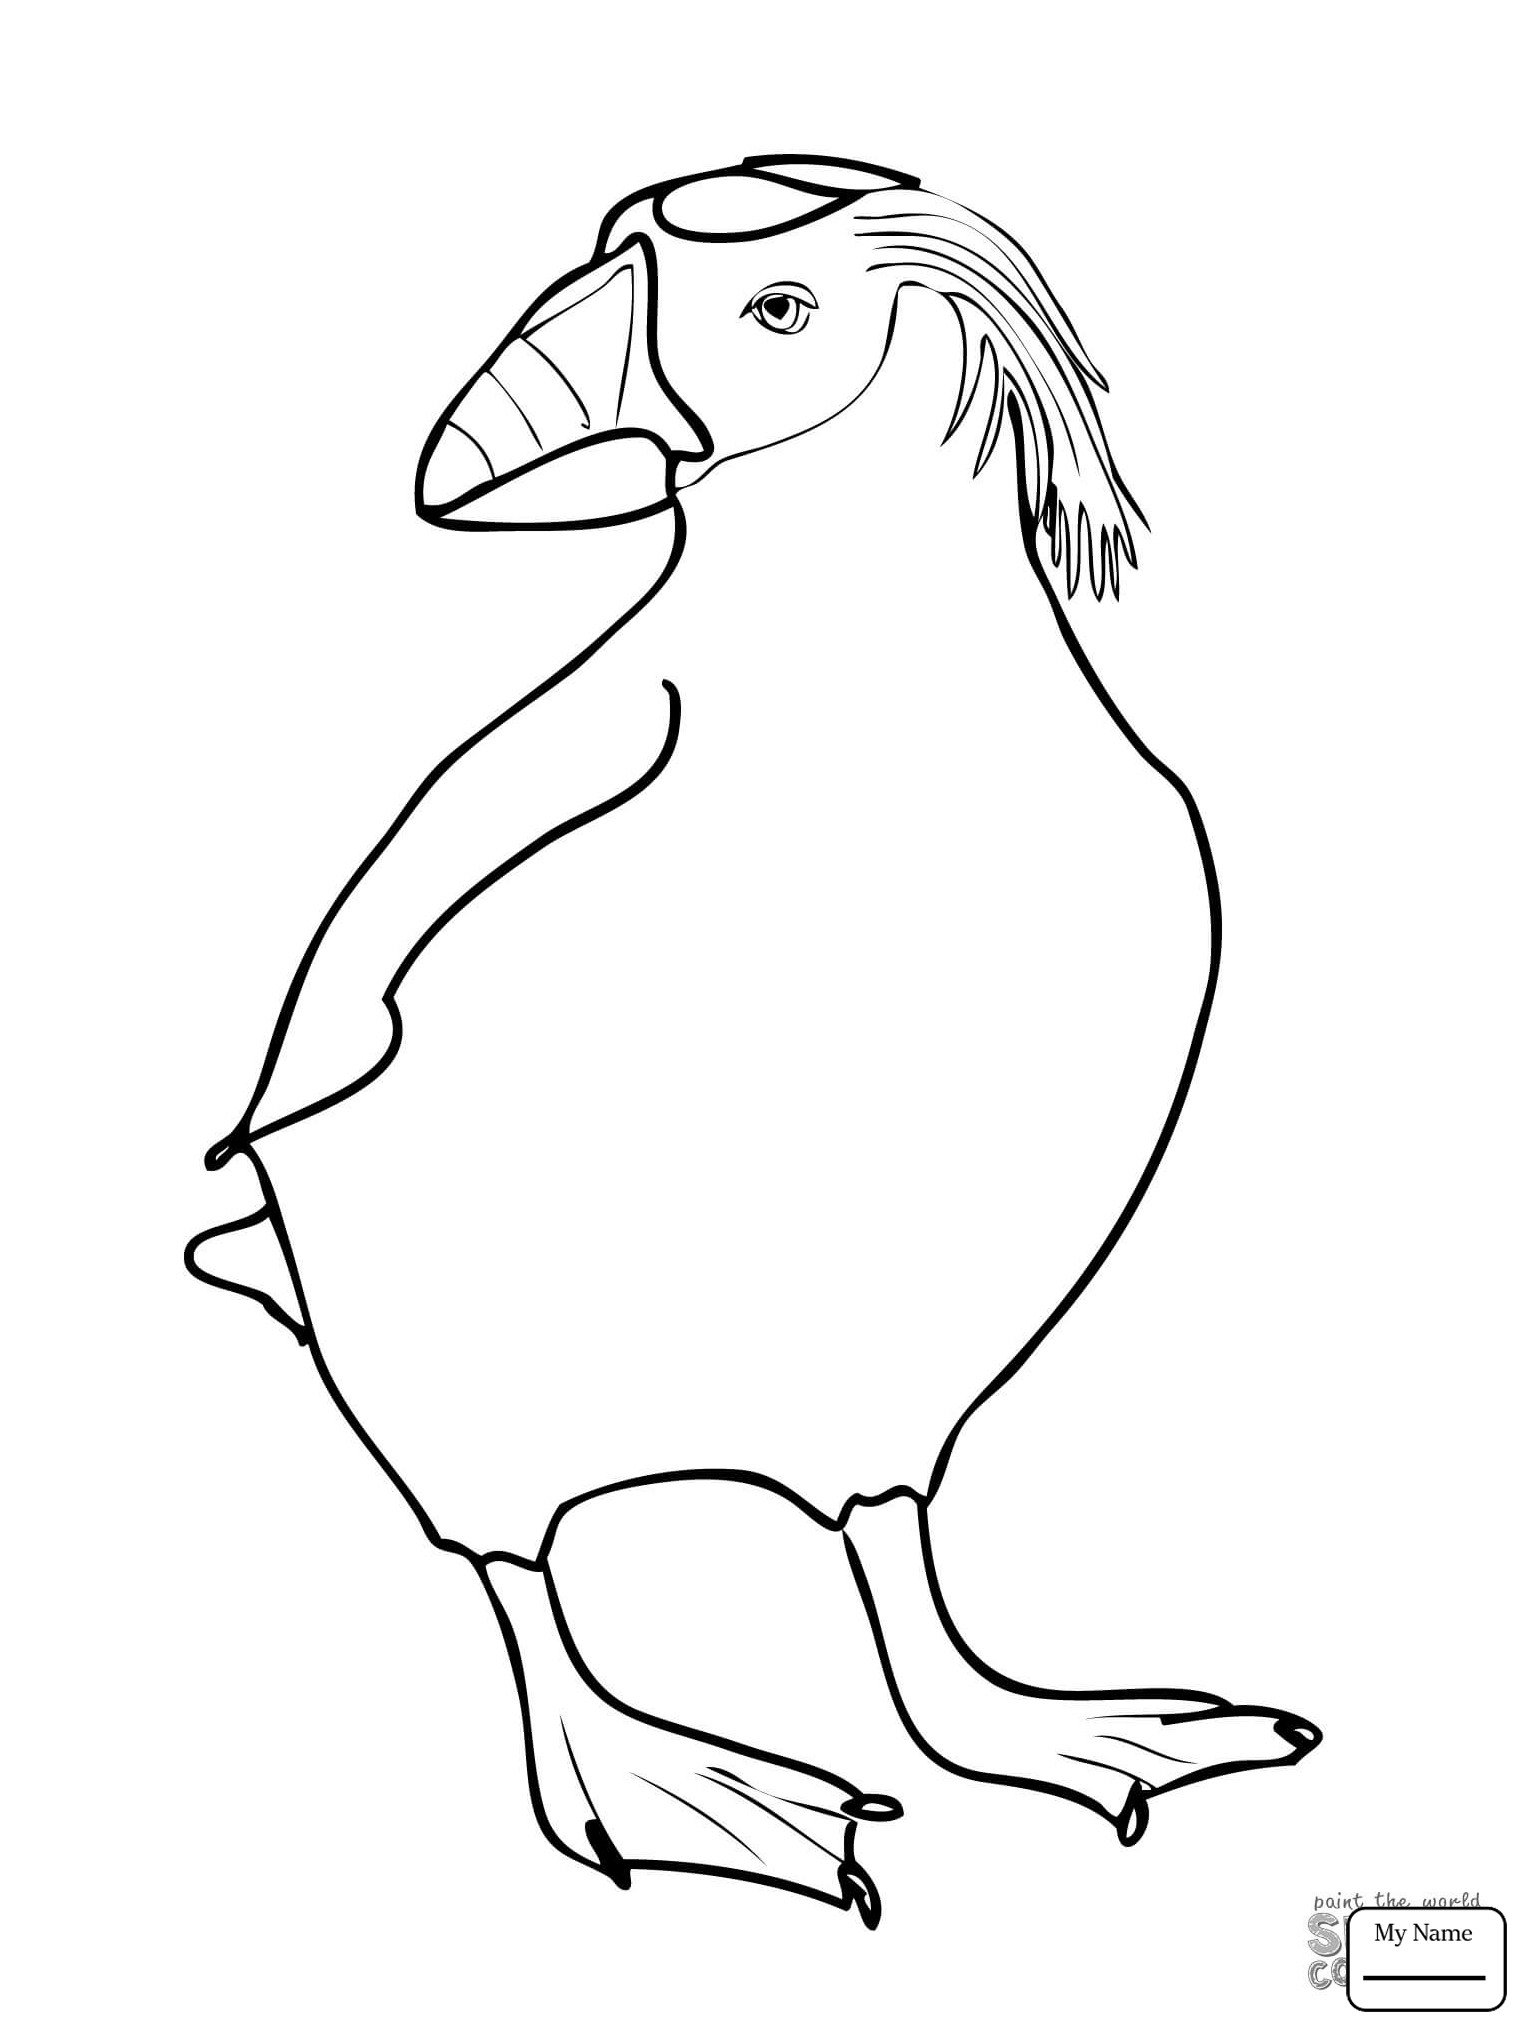 Dodo Coloring Pages at GetColorings.com | Free printable colorings